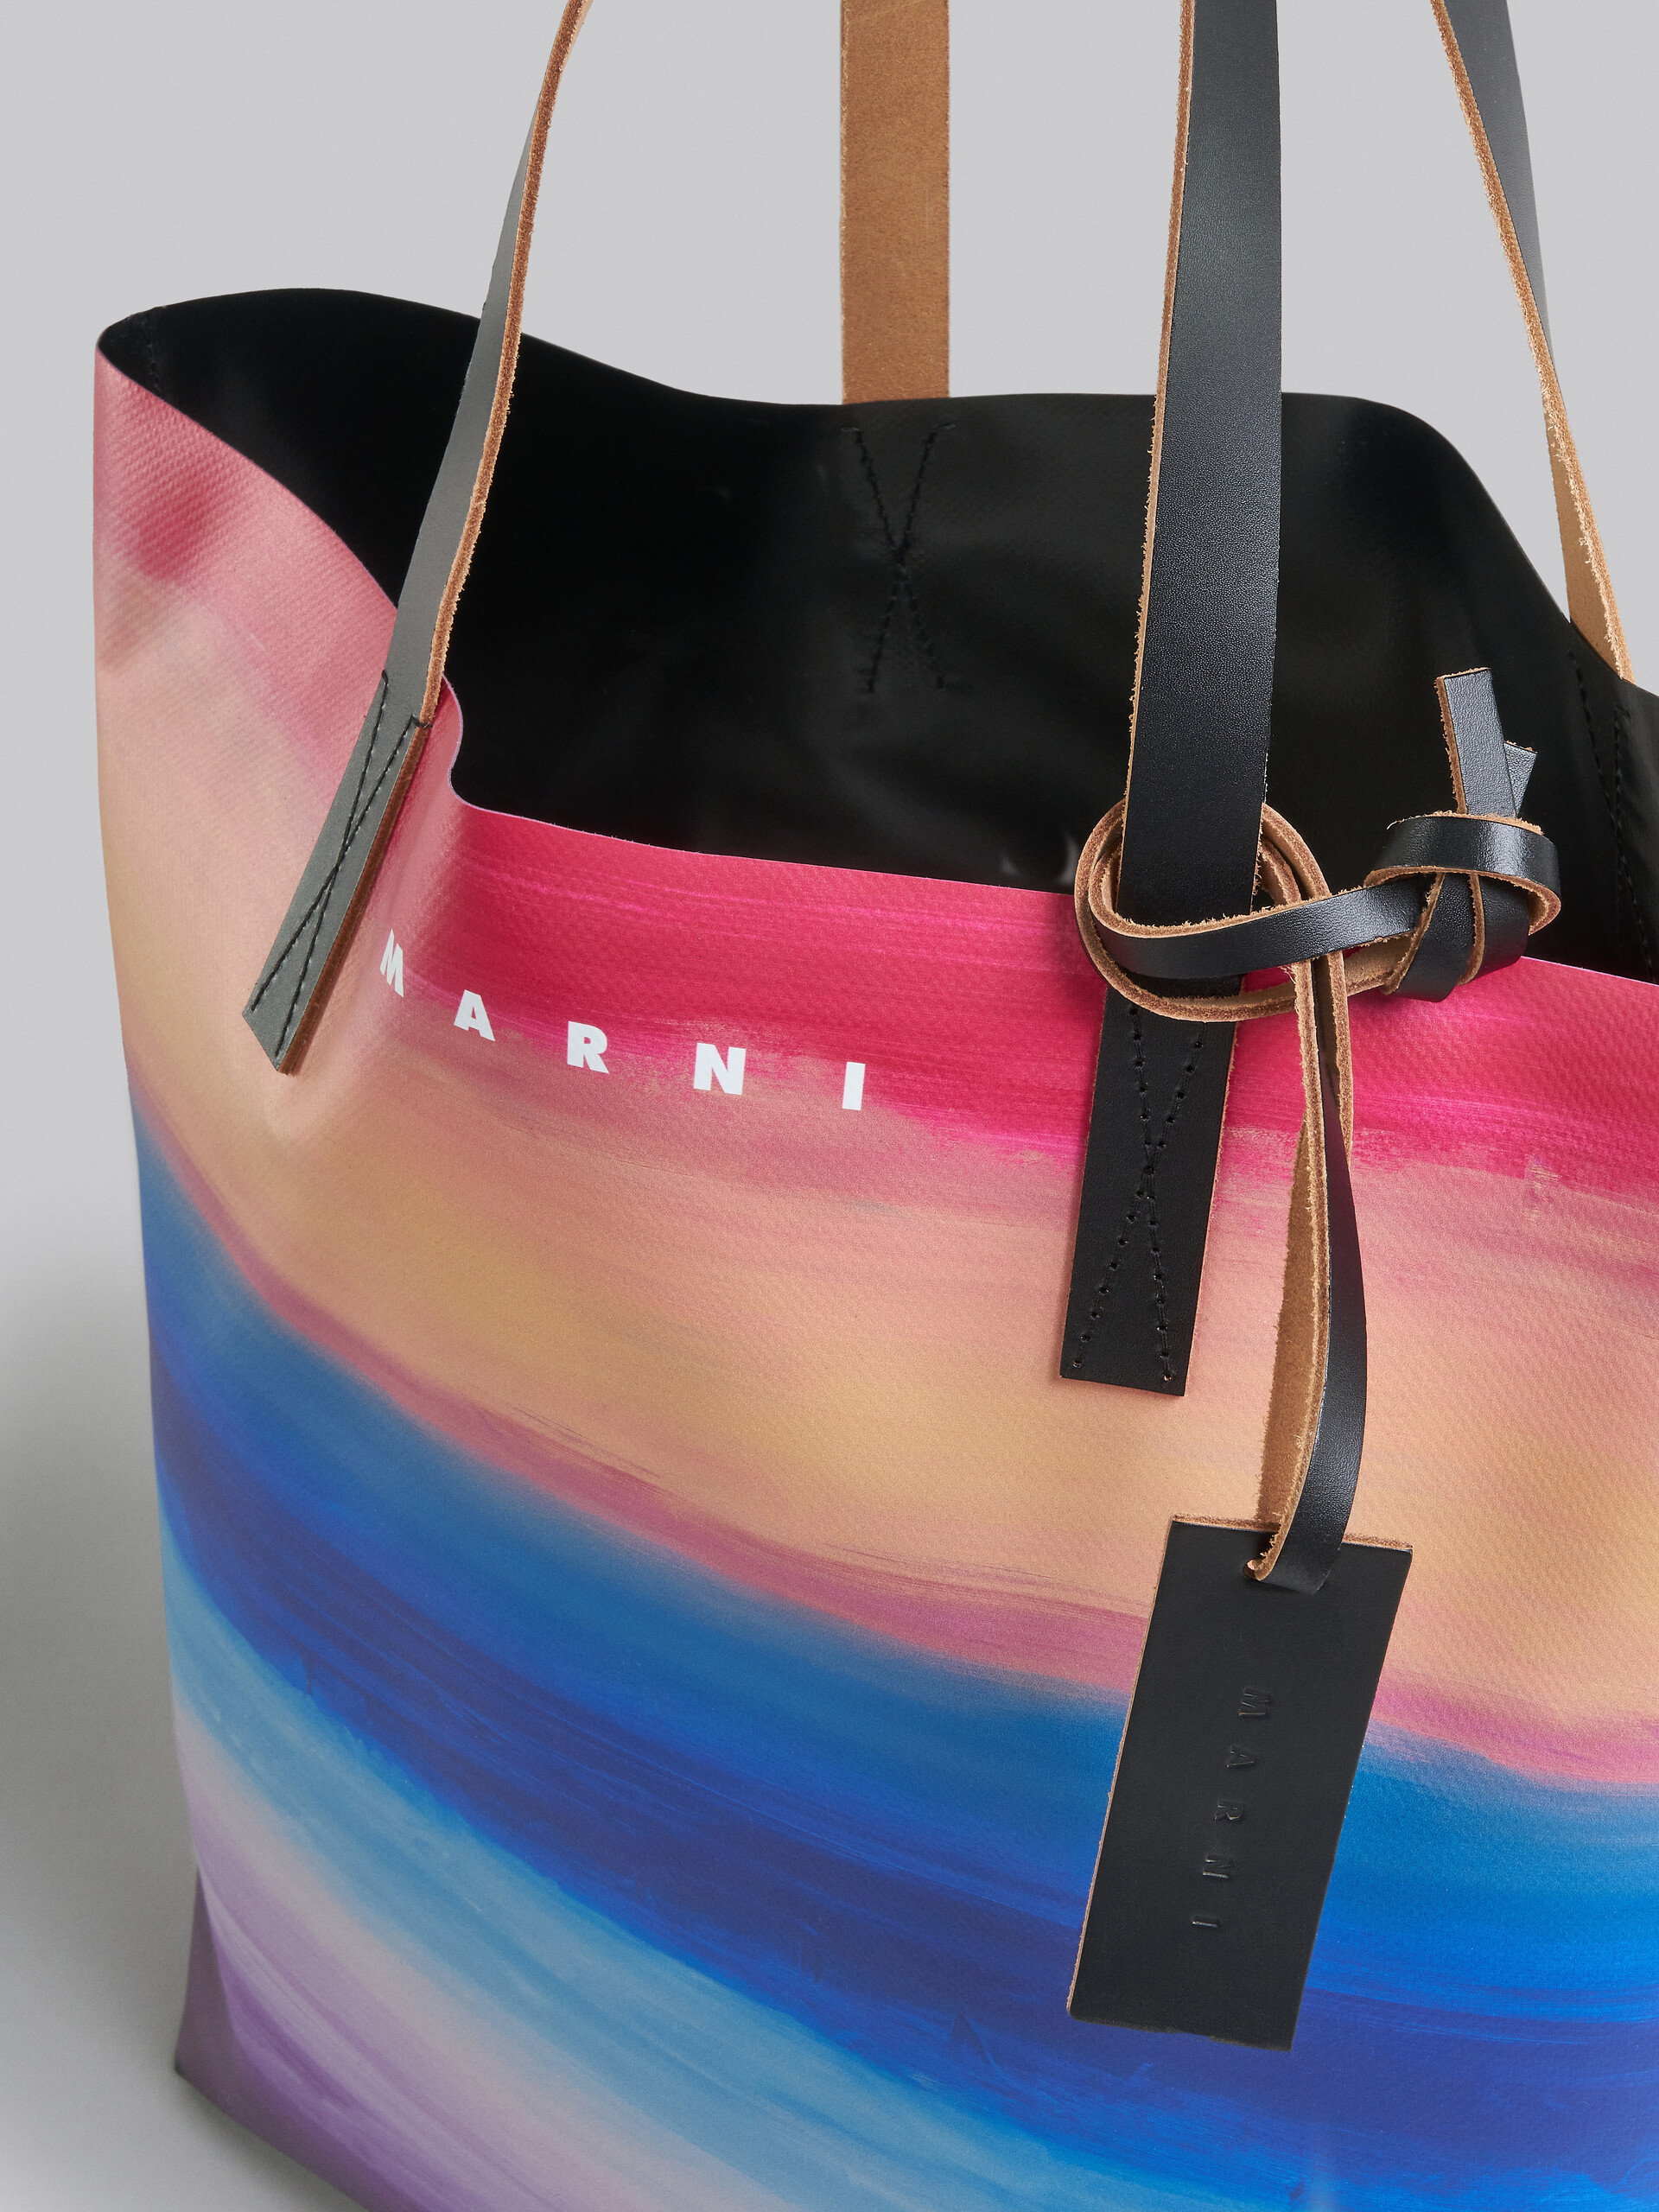 Tribeca shopping bag with Dark Side of the Moon print - Shopping Bags - Image 4